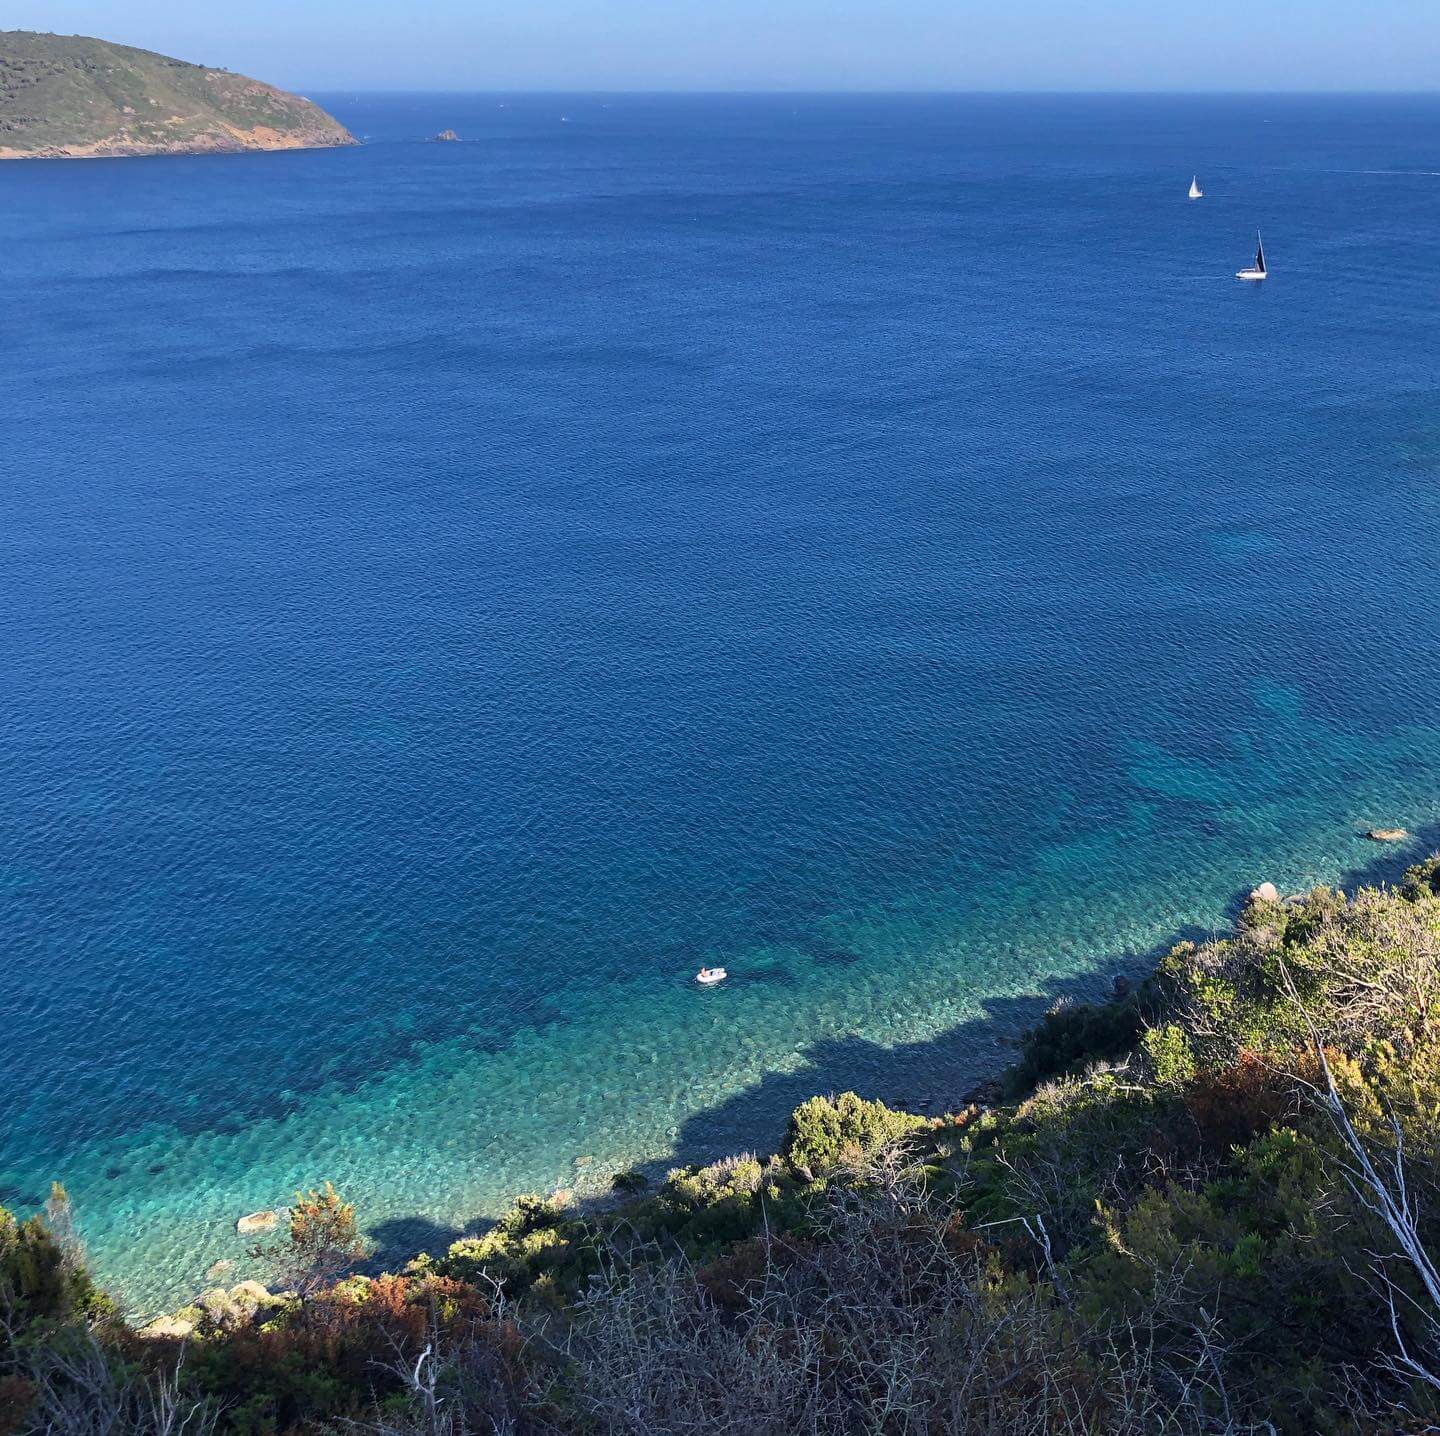 Exploring the natural landscape of Elba … Capo di Fonza is just one beautiful spot in the dense network of hiking trails on the biggest island of the Tuscan Archipelago. #capodifonza #isoladelba #landscape #tuscany #hiking #elbaisland #sea #camping_vs_maria